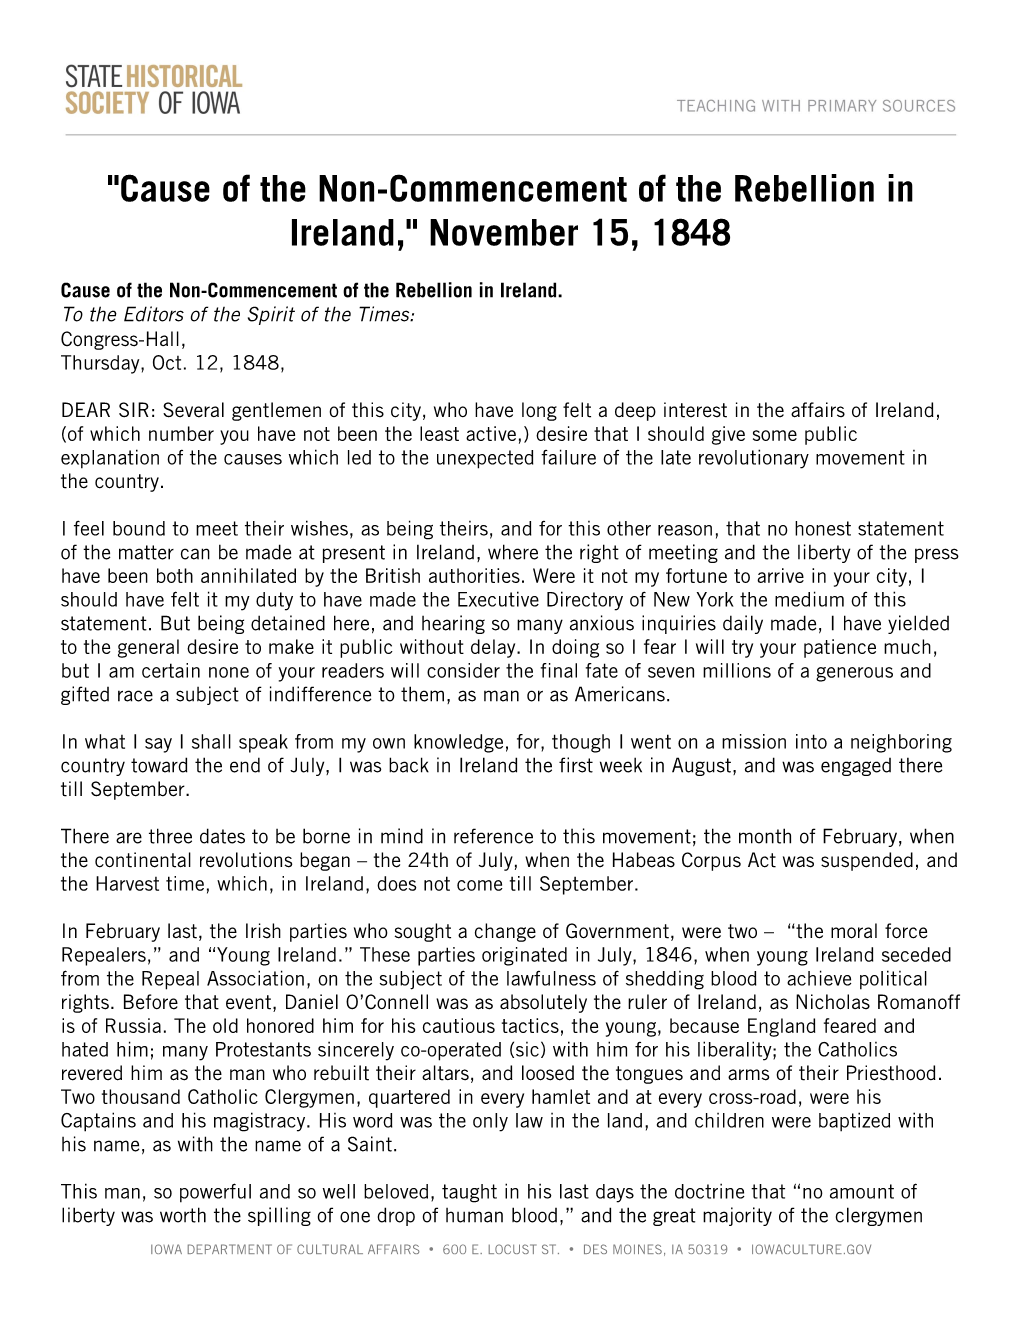 "Cause of the Non-Commencement of the Rebellion in Ireland," November 15, 1848